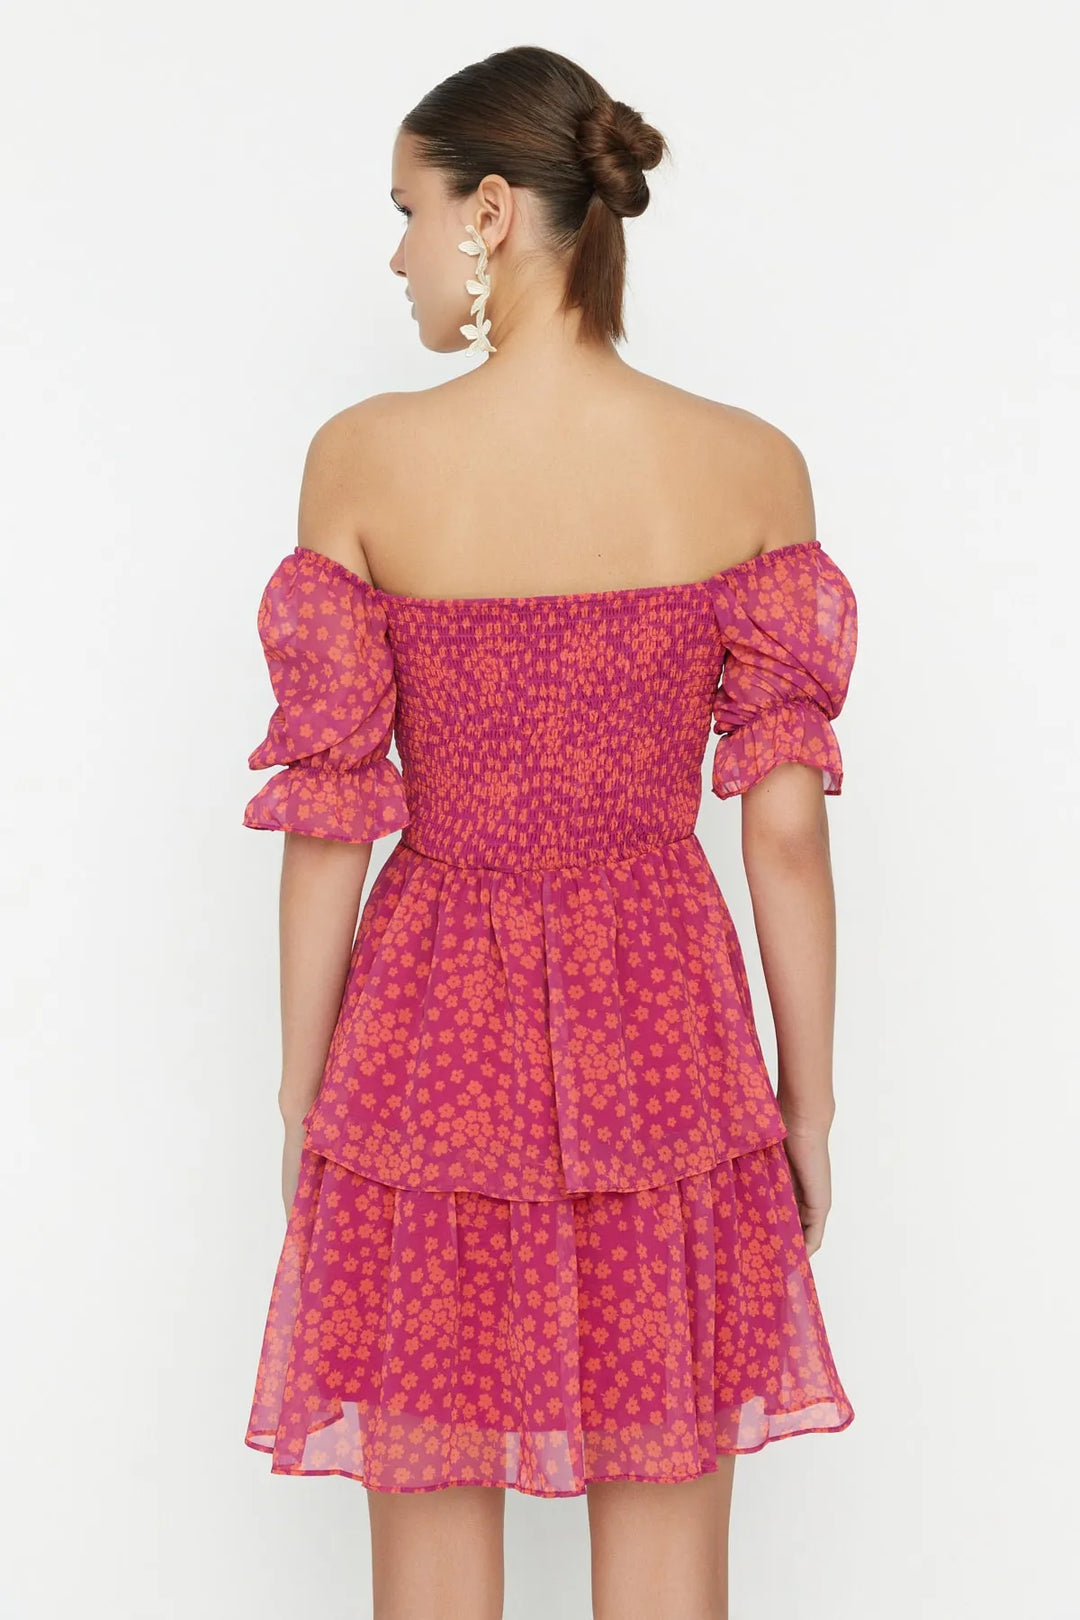 Floral Patterned Chiffon Woven Dress with Flounce Skirt